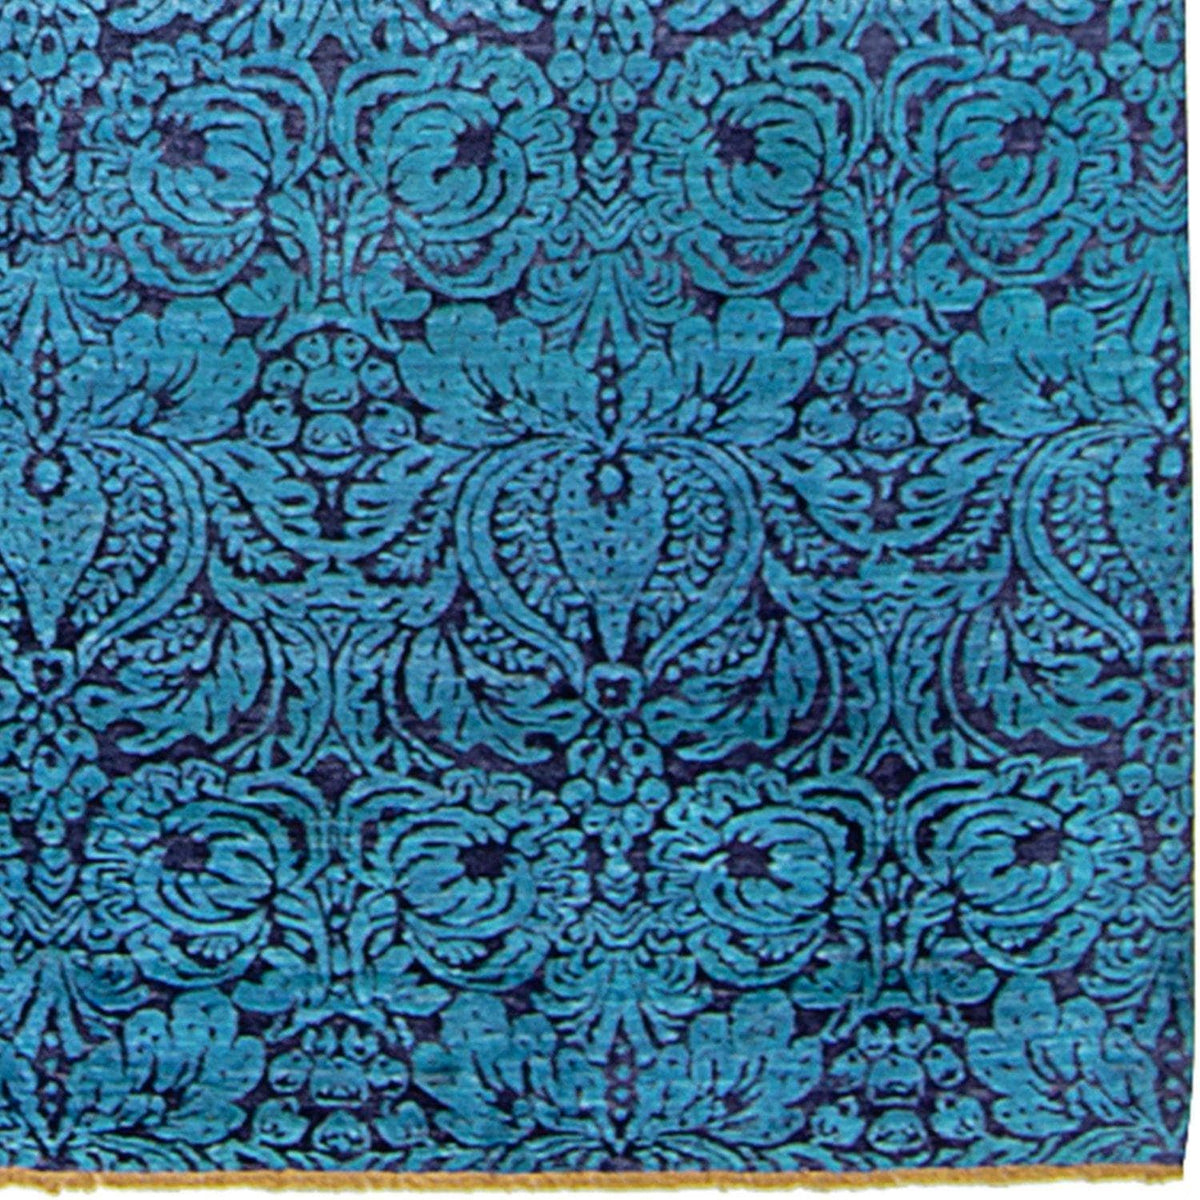 Contemporary Hand-knotted NZ Wool and Bamboo Silk Damask Rug 197cm x 299cm